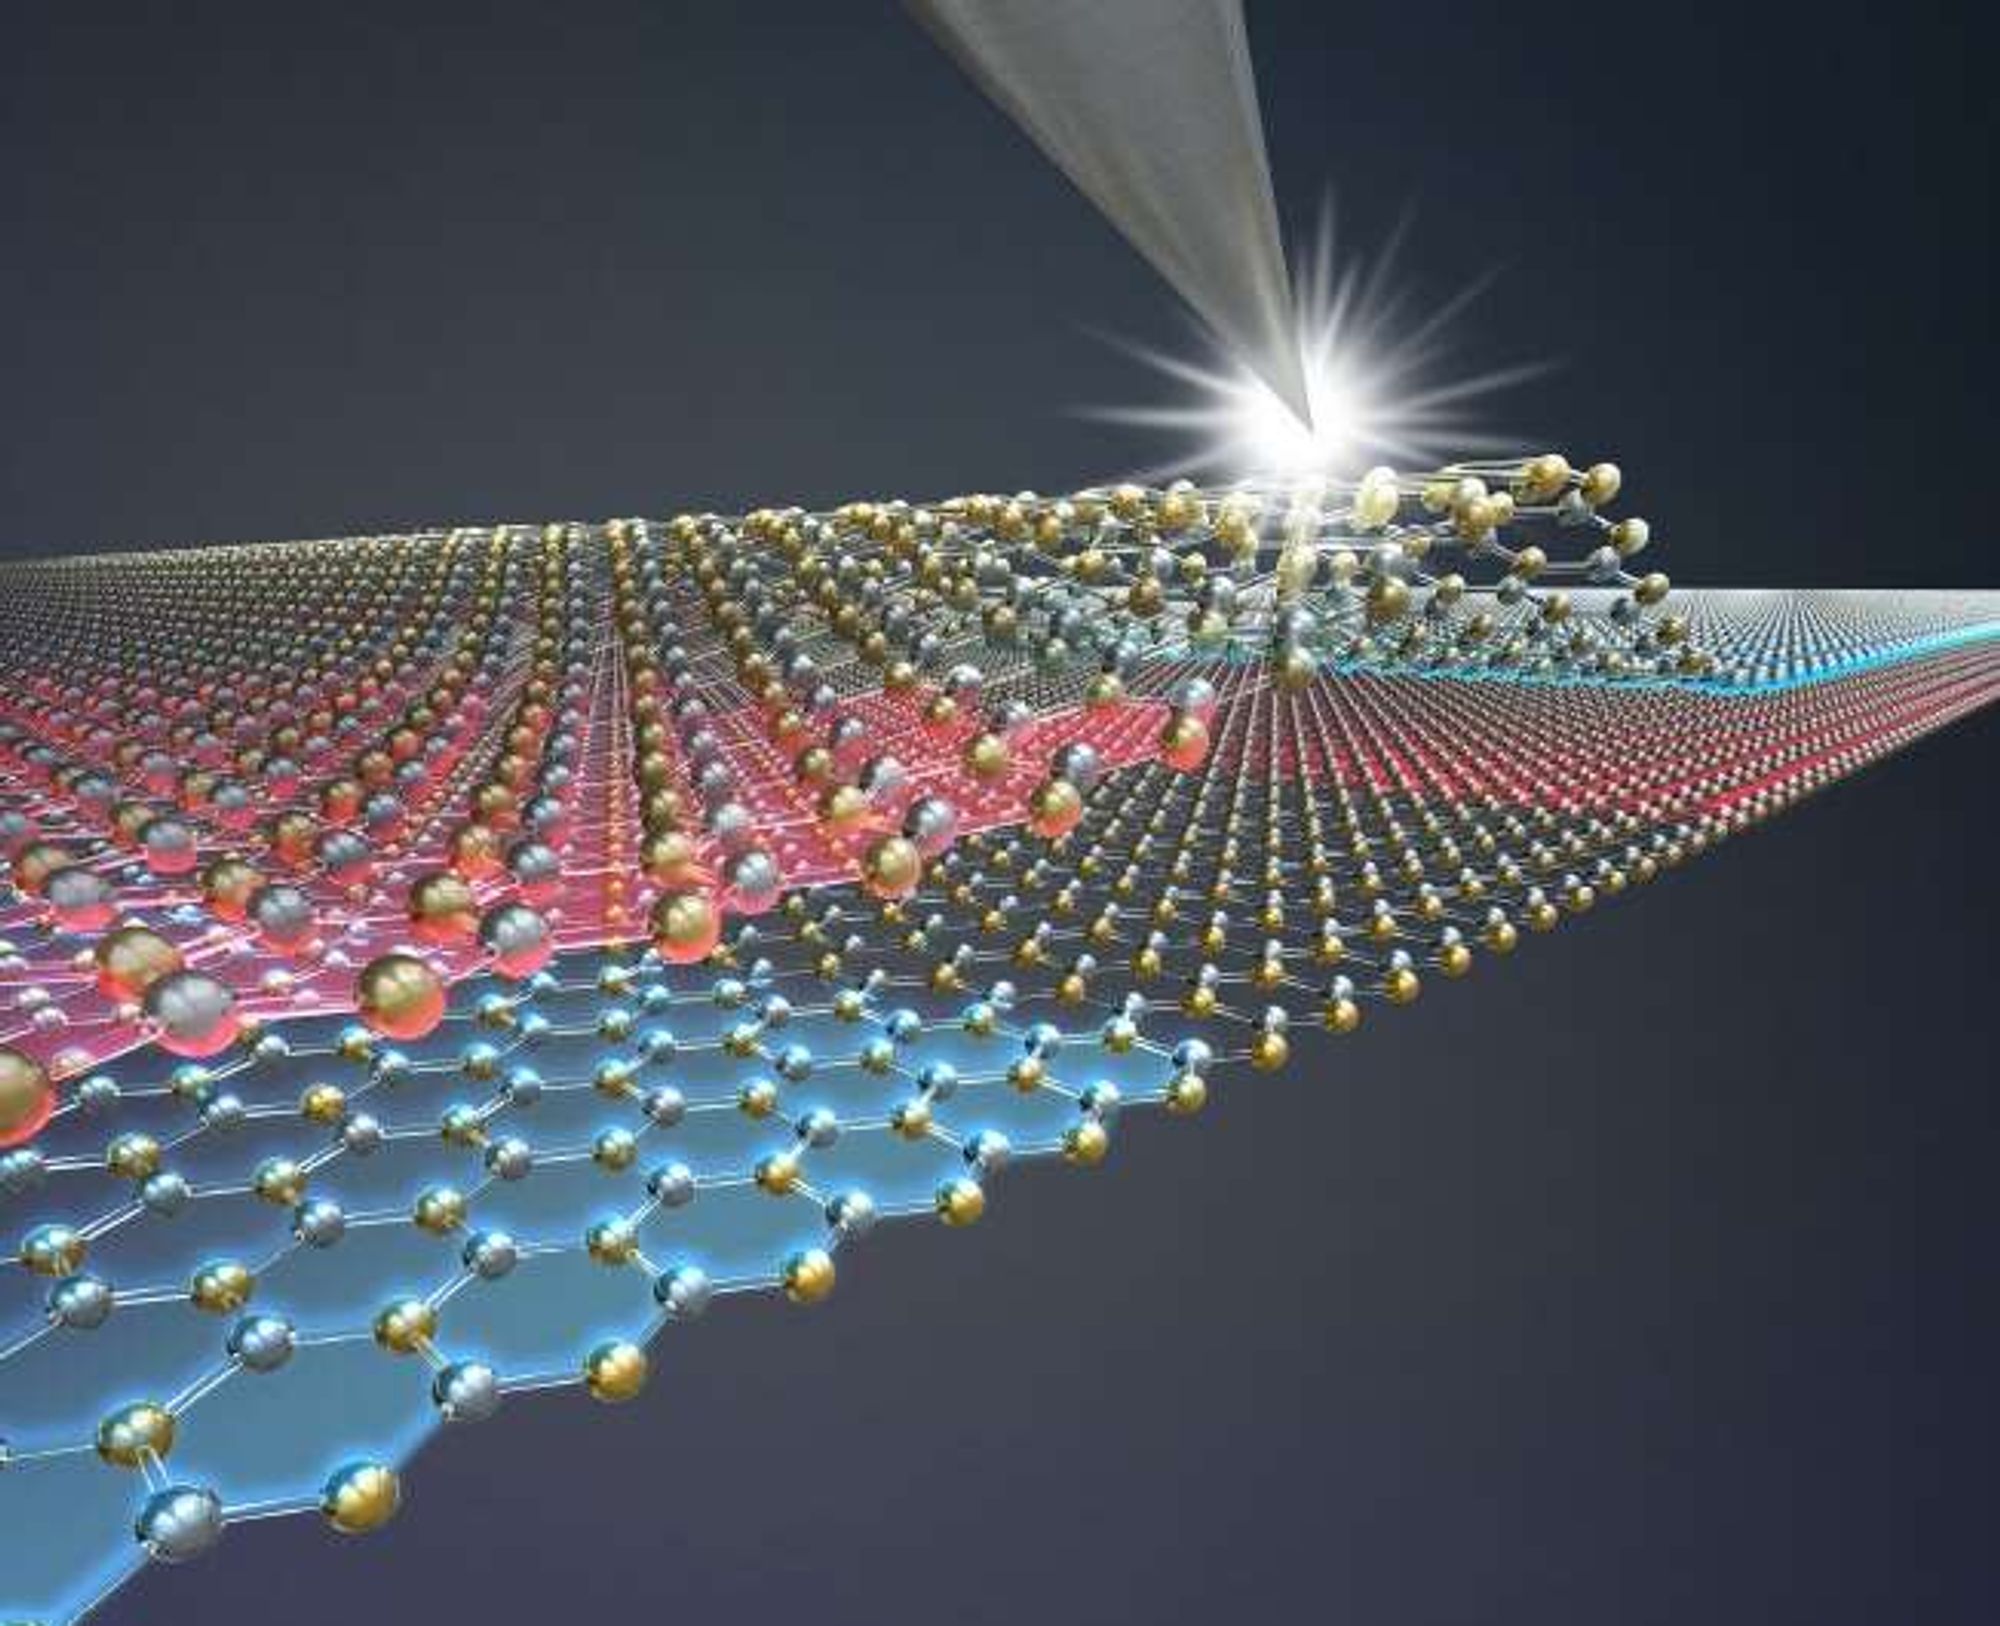 The world's thinnest technology—only two atoms thick